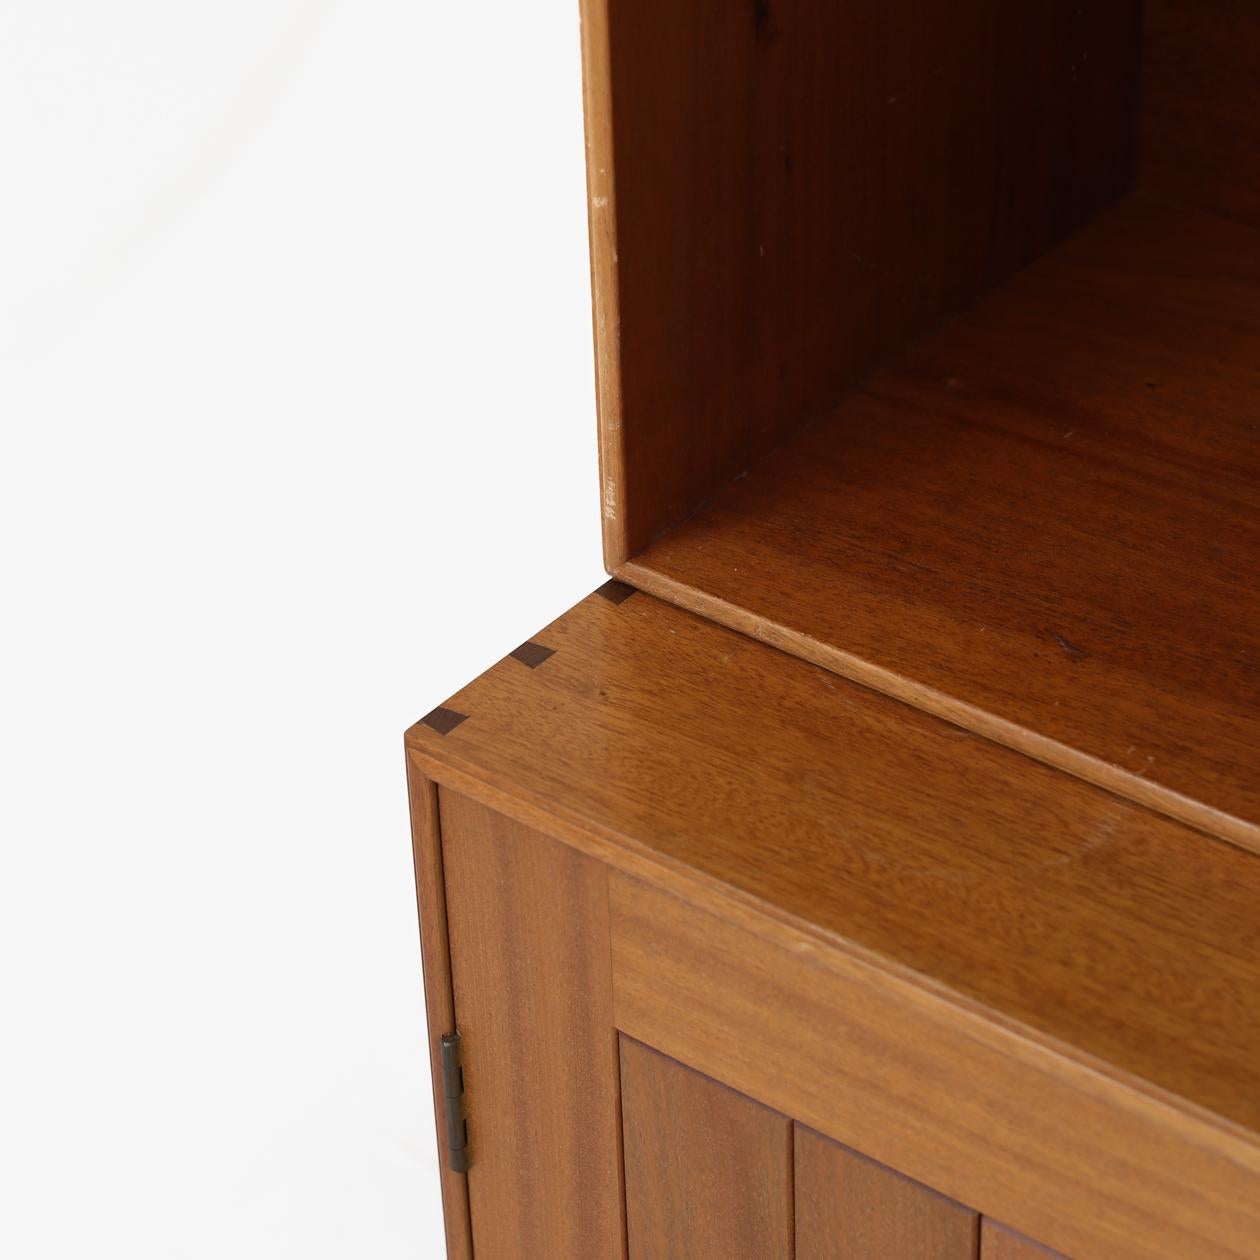 Cabinet by architect Mogens Koch for Rud. Rasmussen Snedkerier.
We can offer Mogens Koch's shelving system in customised quantities. Shown in the first picture are three cabinets, three pedestals and six bookcases in mahogany. The price is for one